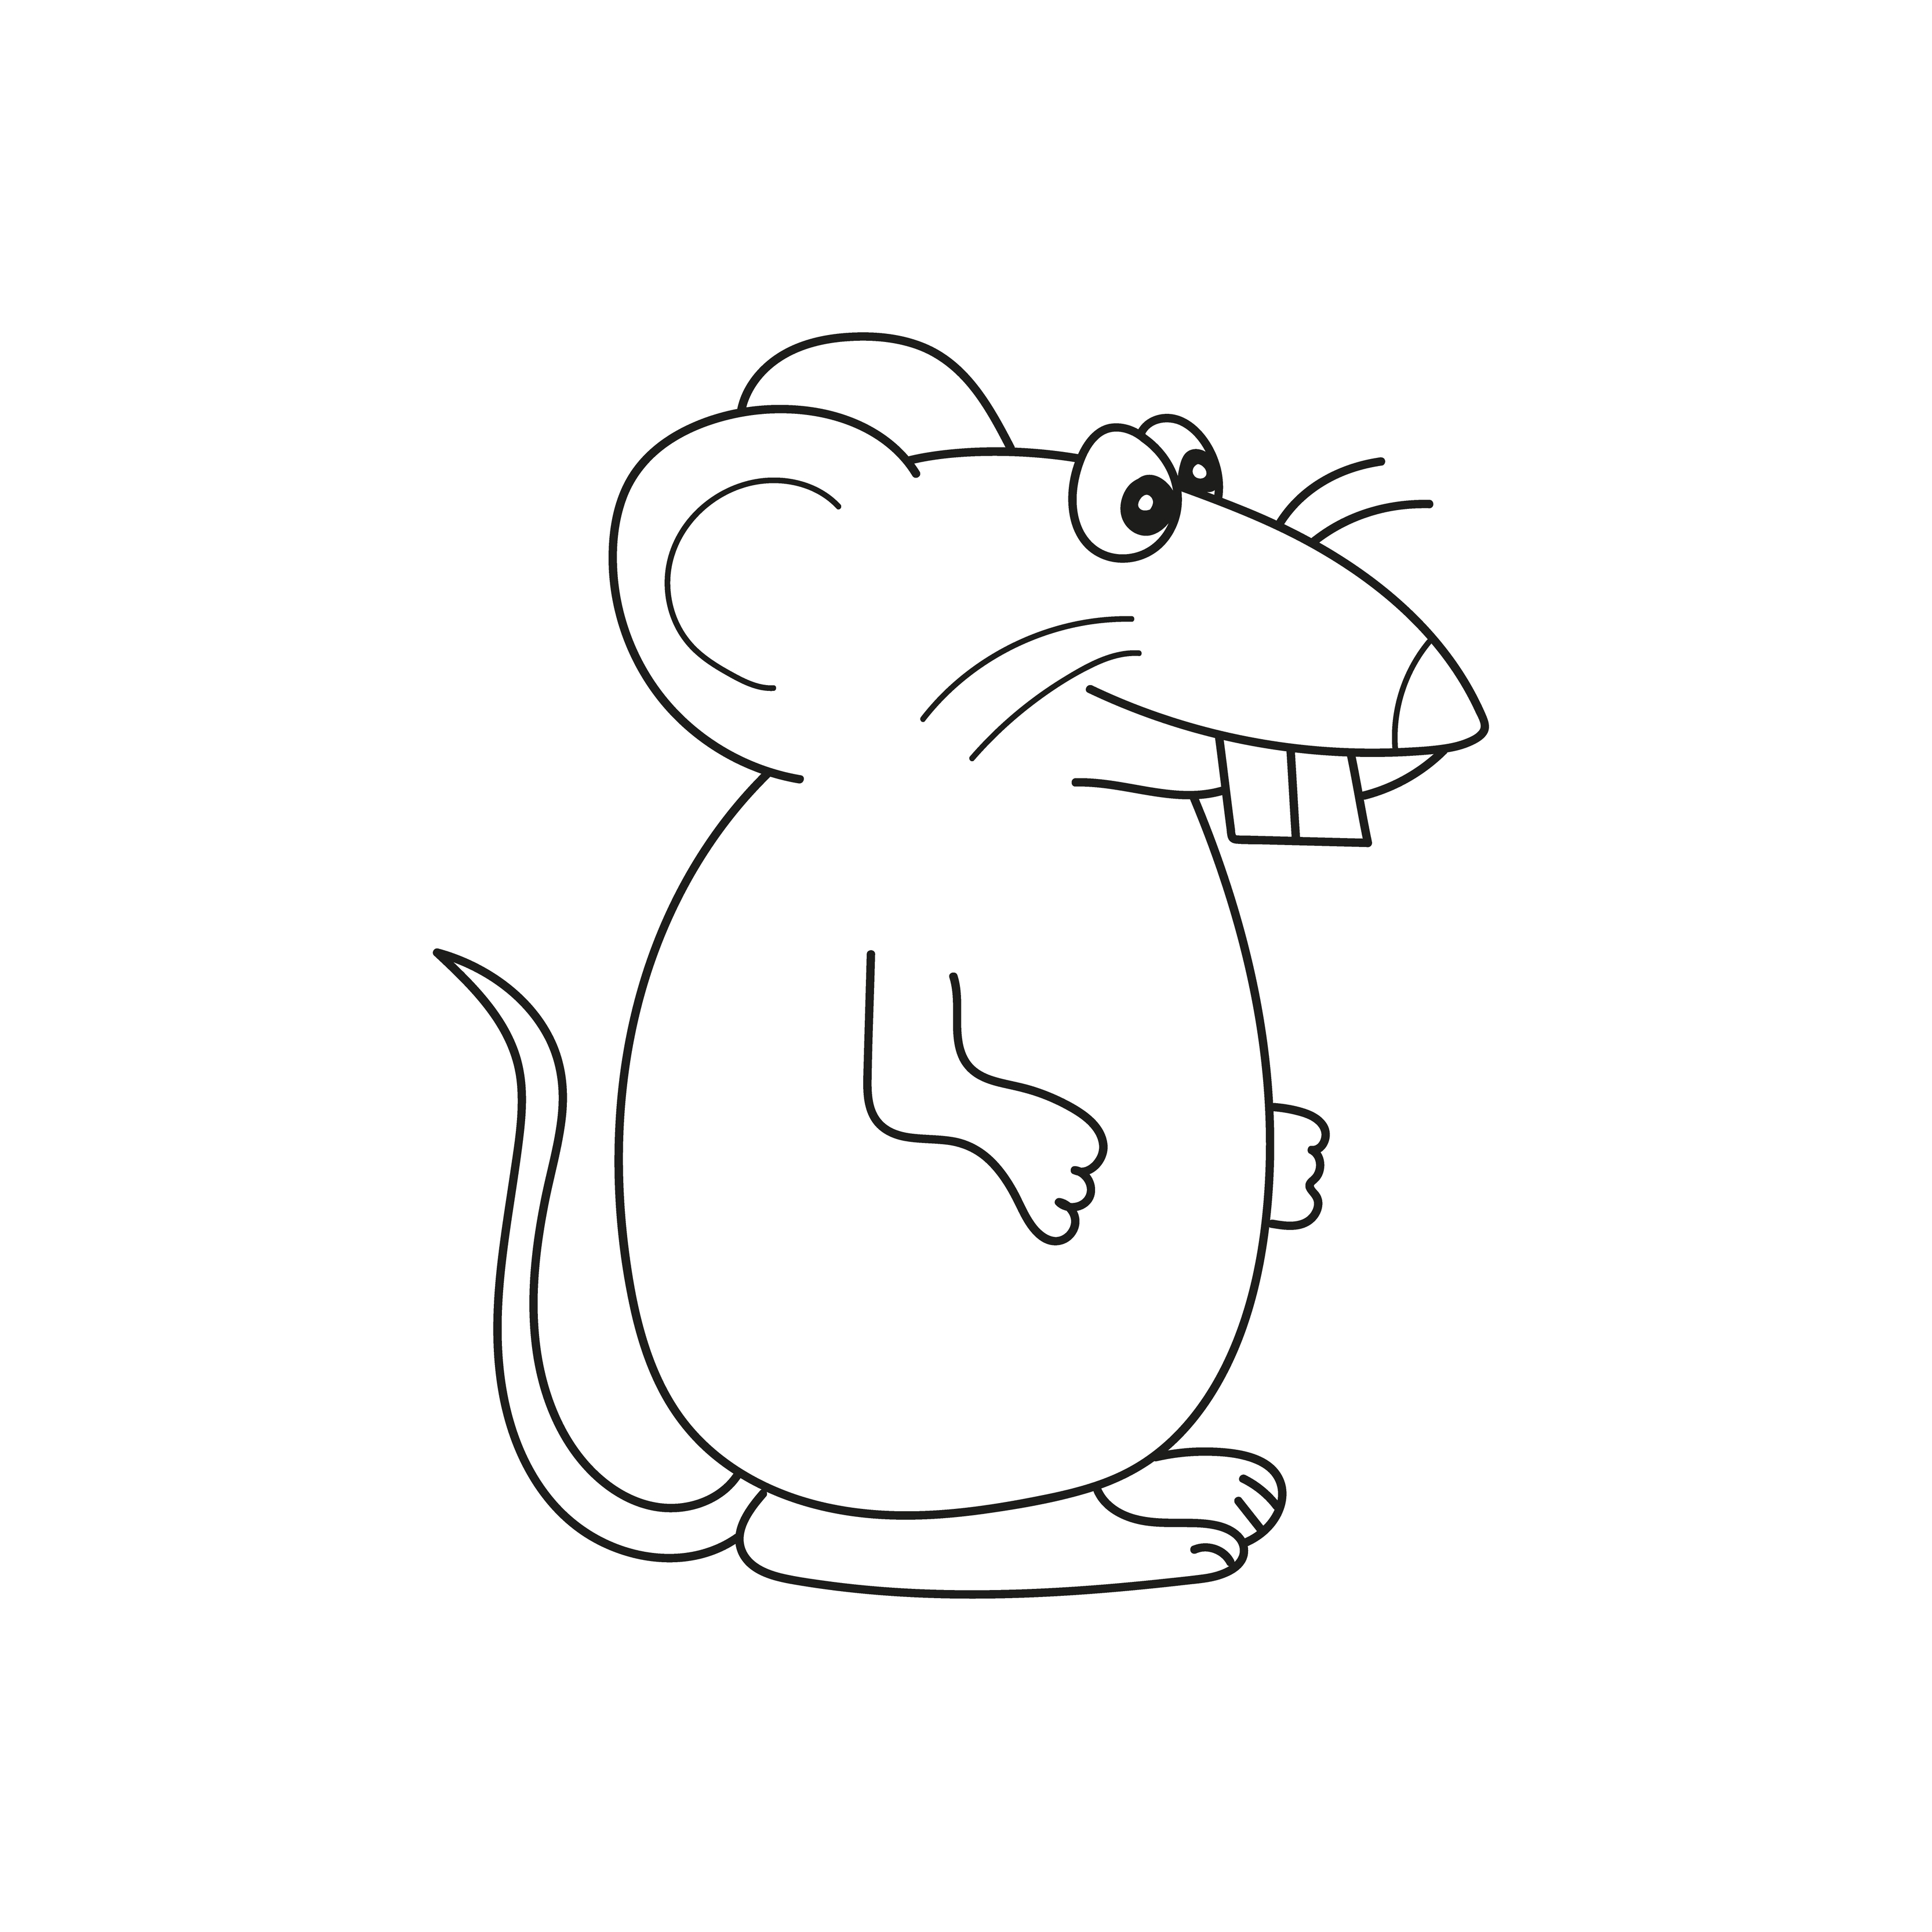 Simple coloring page. A cute rat   linear vector illustration for ...